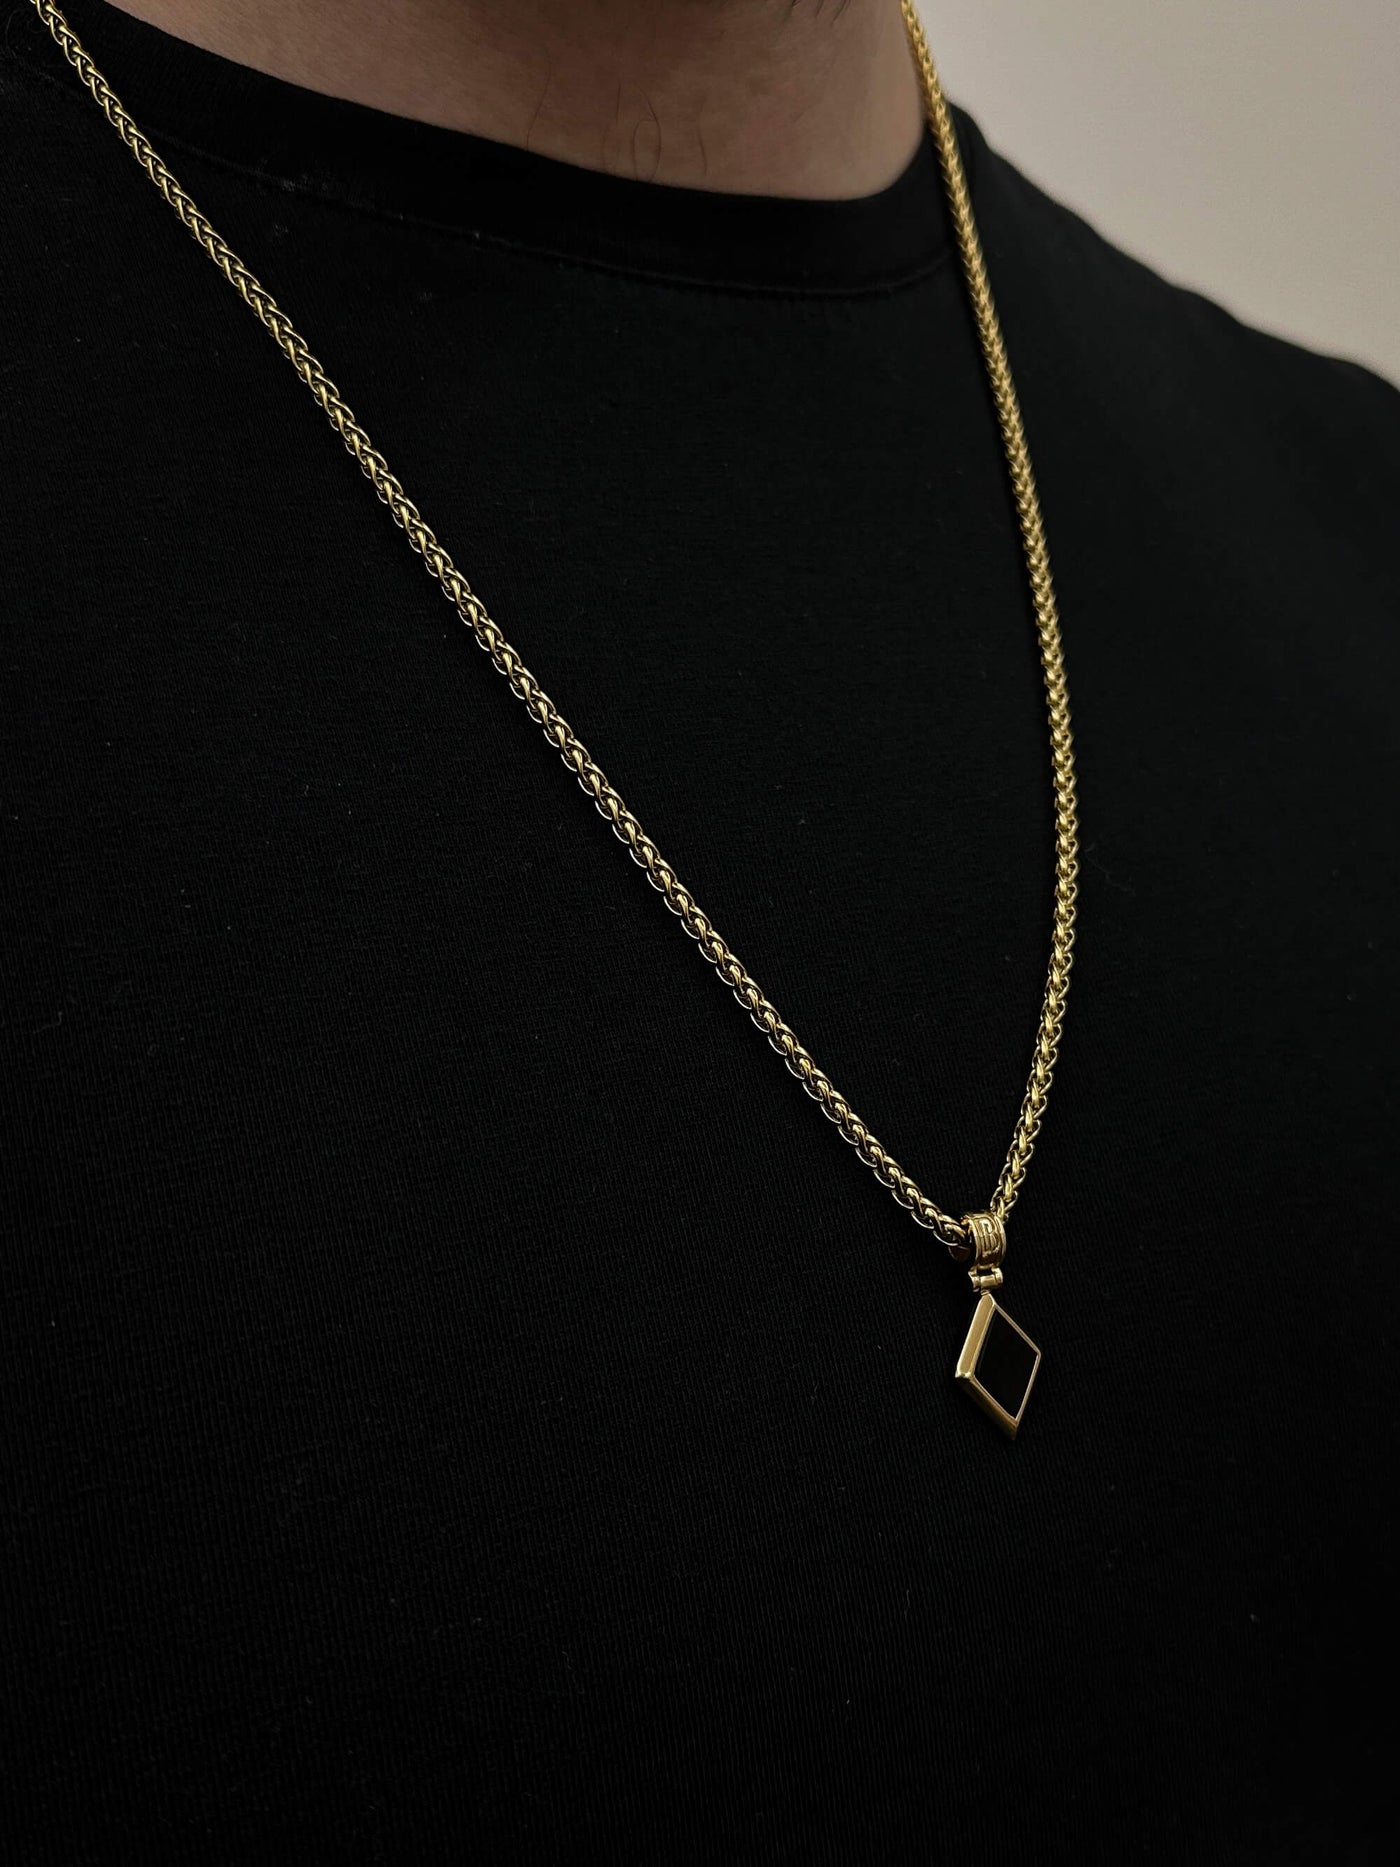 The Gold Plated Onyx Necklace I